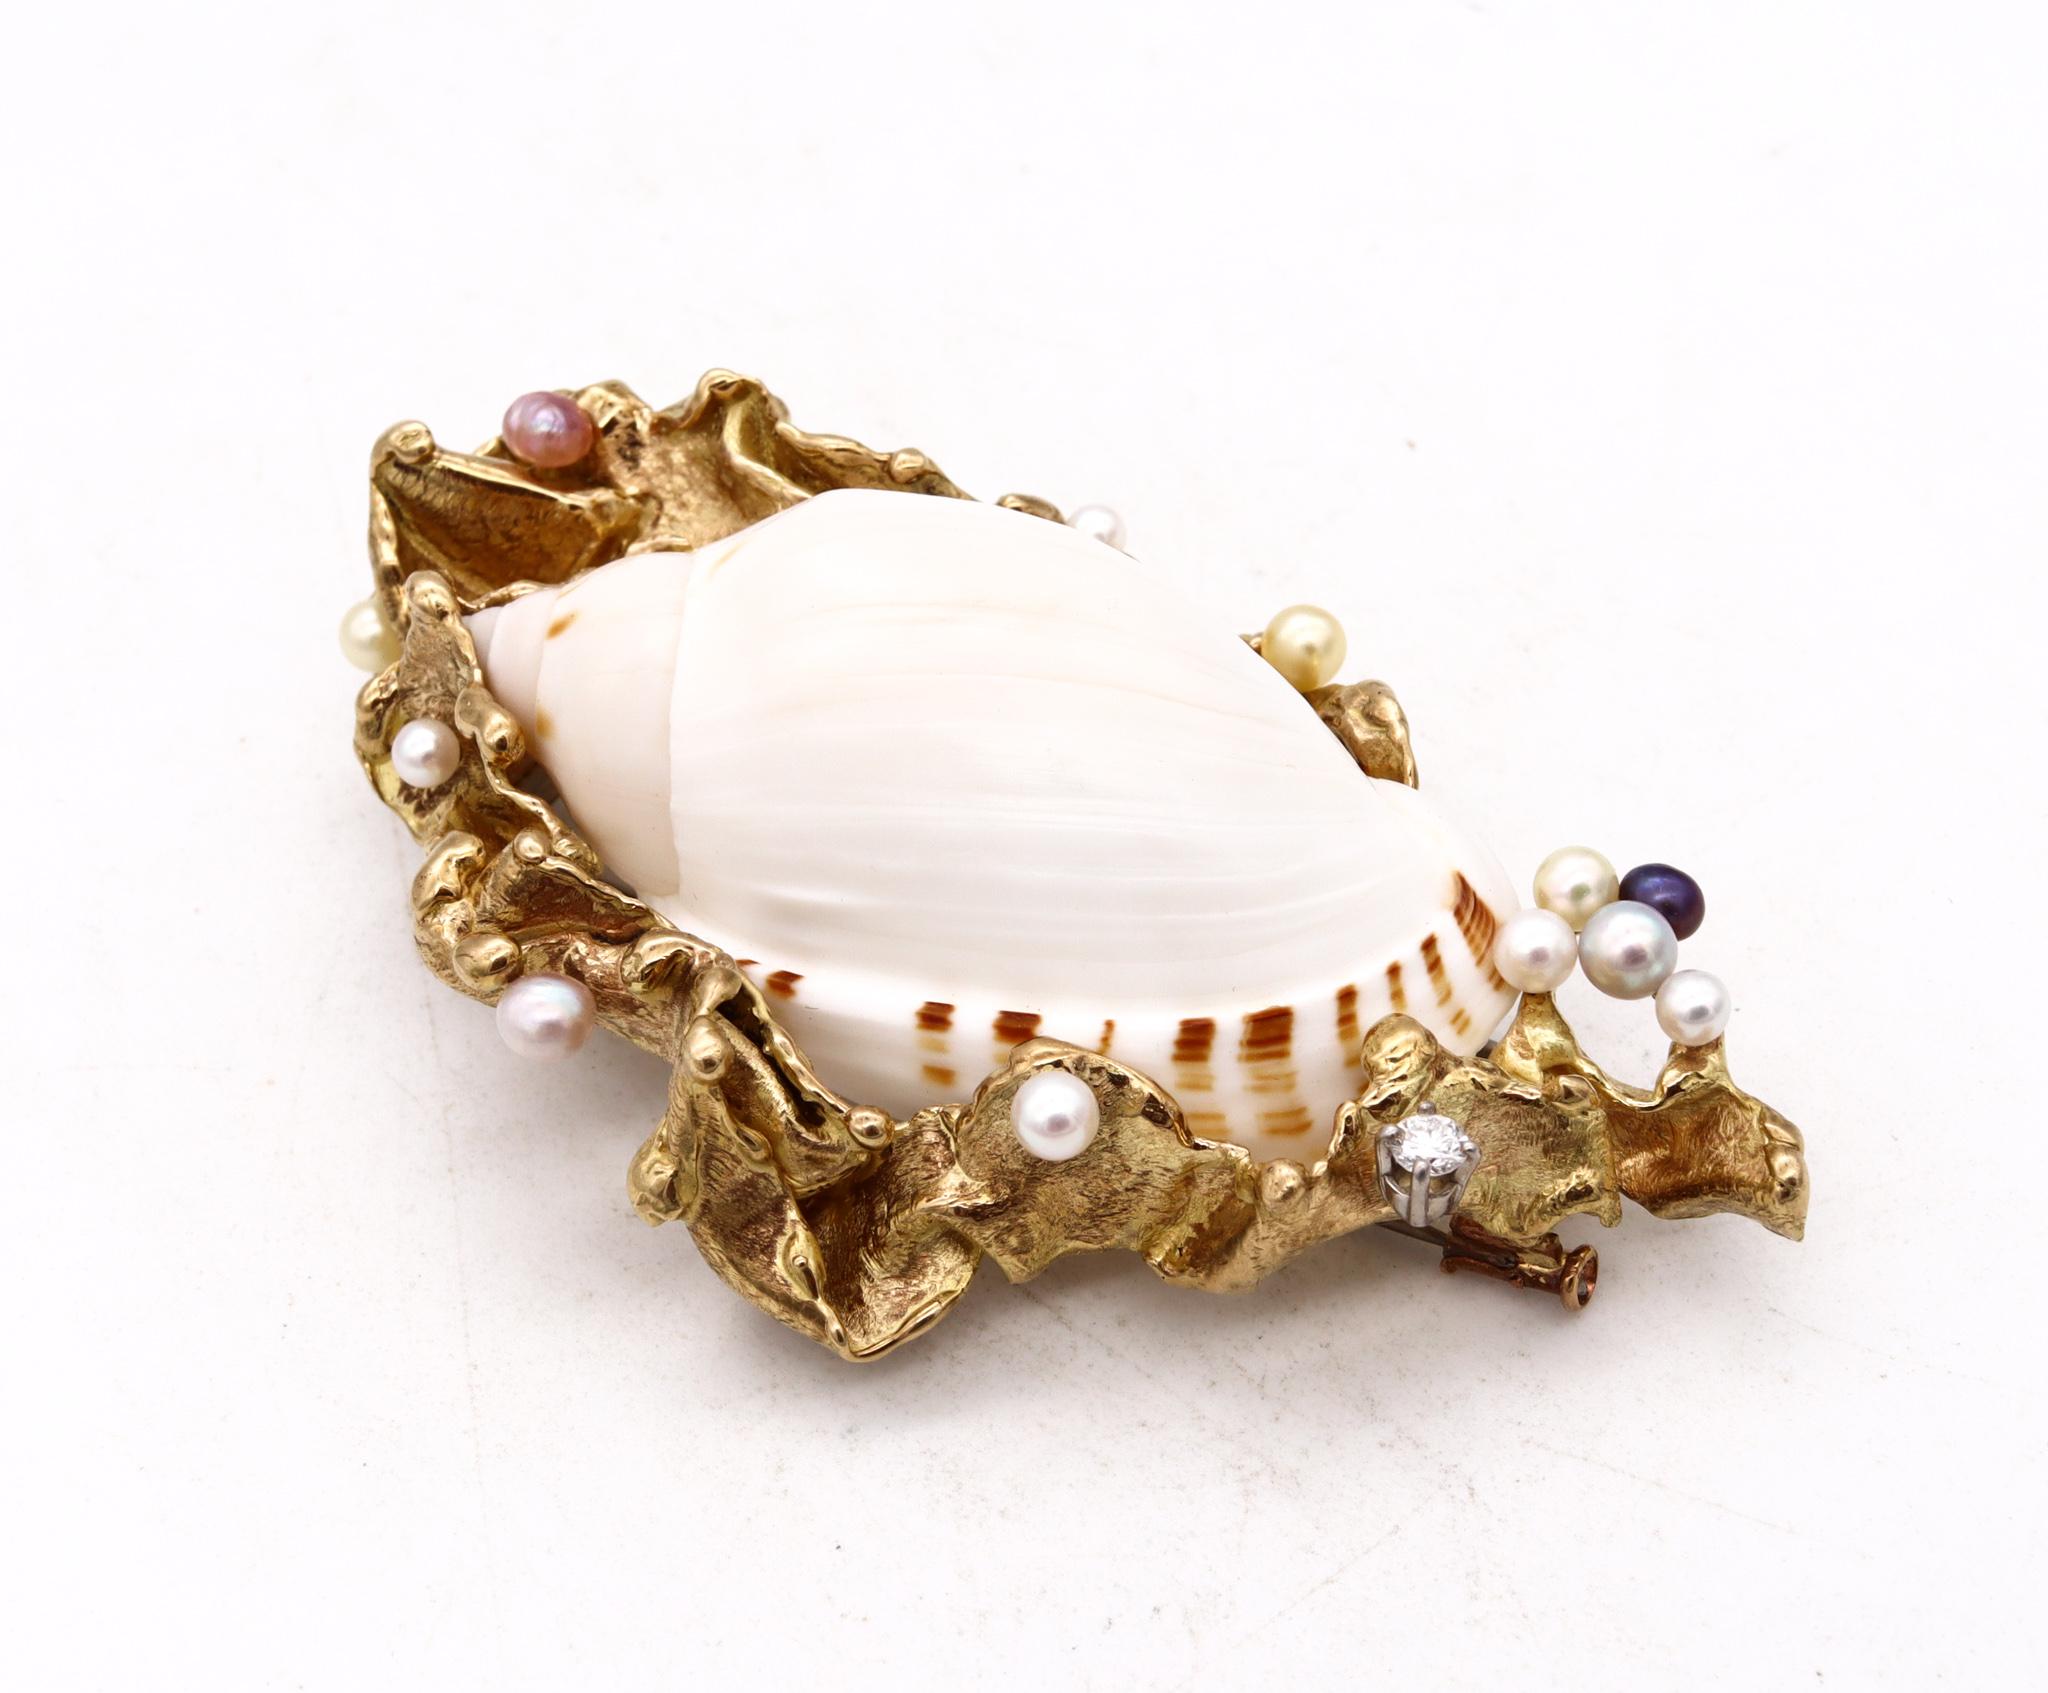 Gilbert Albert 1970 Swiss Modernist Pendant Brooch In 18Kt Gold Shell And Pearls For Sale 2